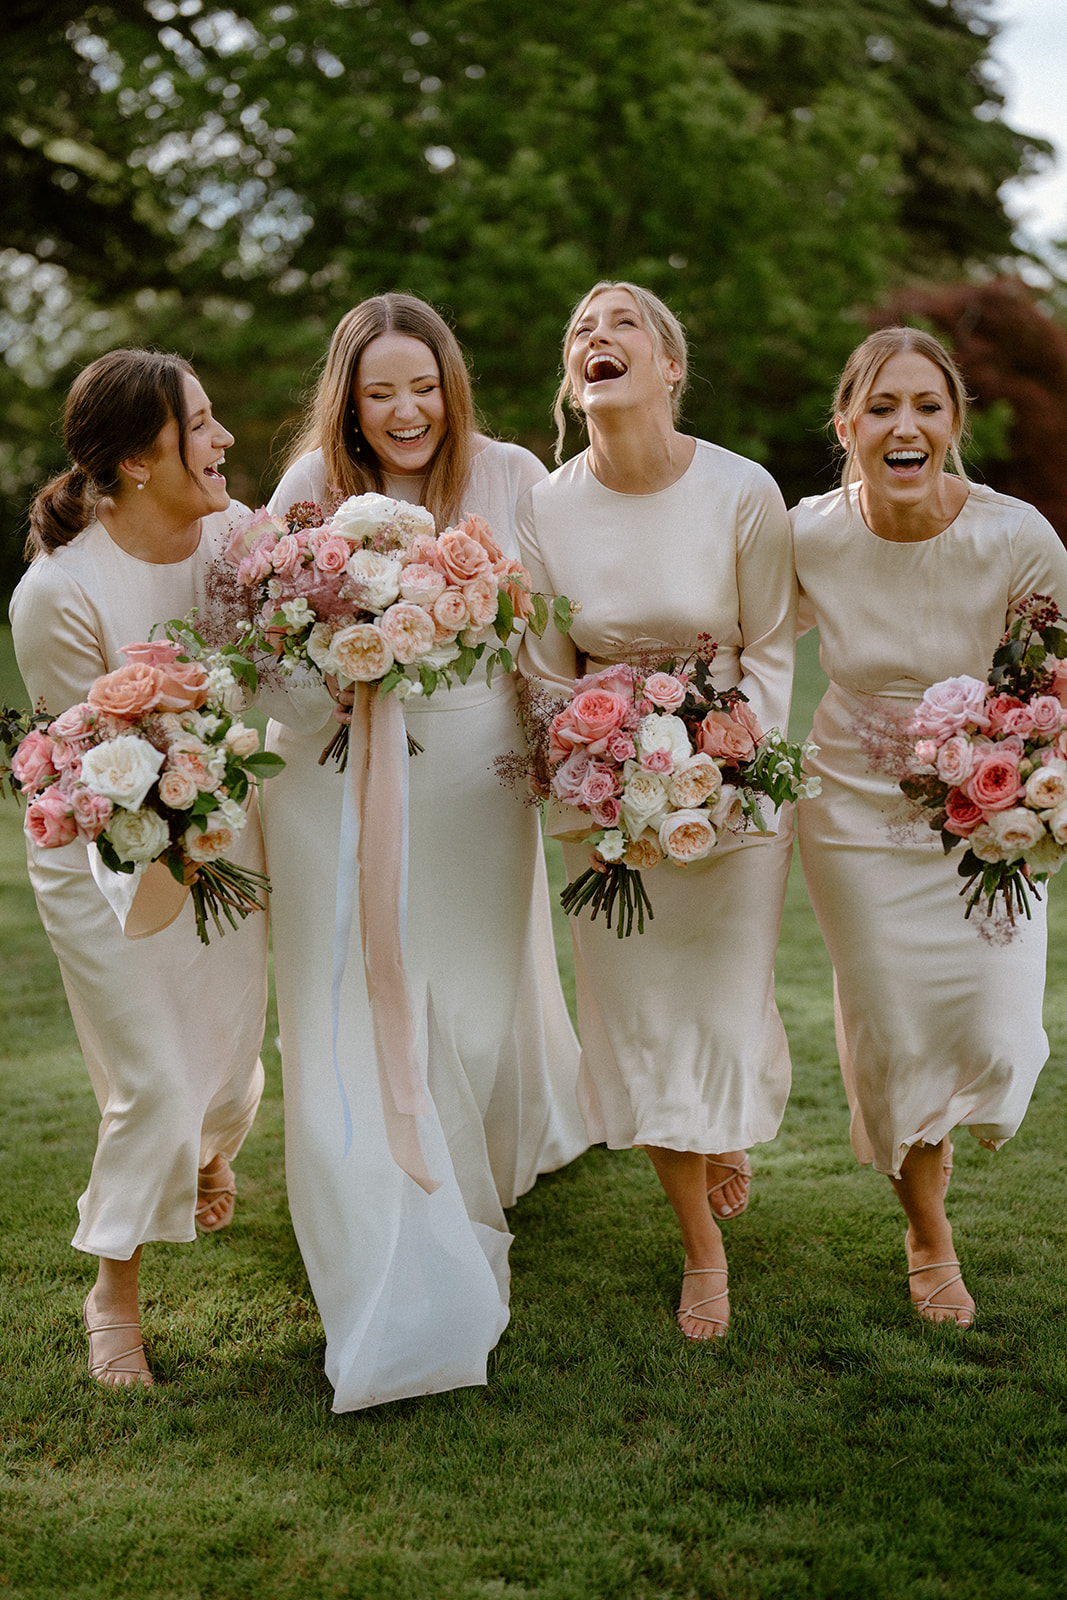 A group of bridesmaids having a candid laugh captured by Dan Cartwright Photography at a Milton Park wedding.